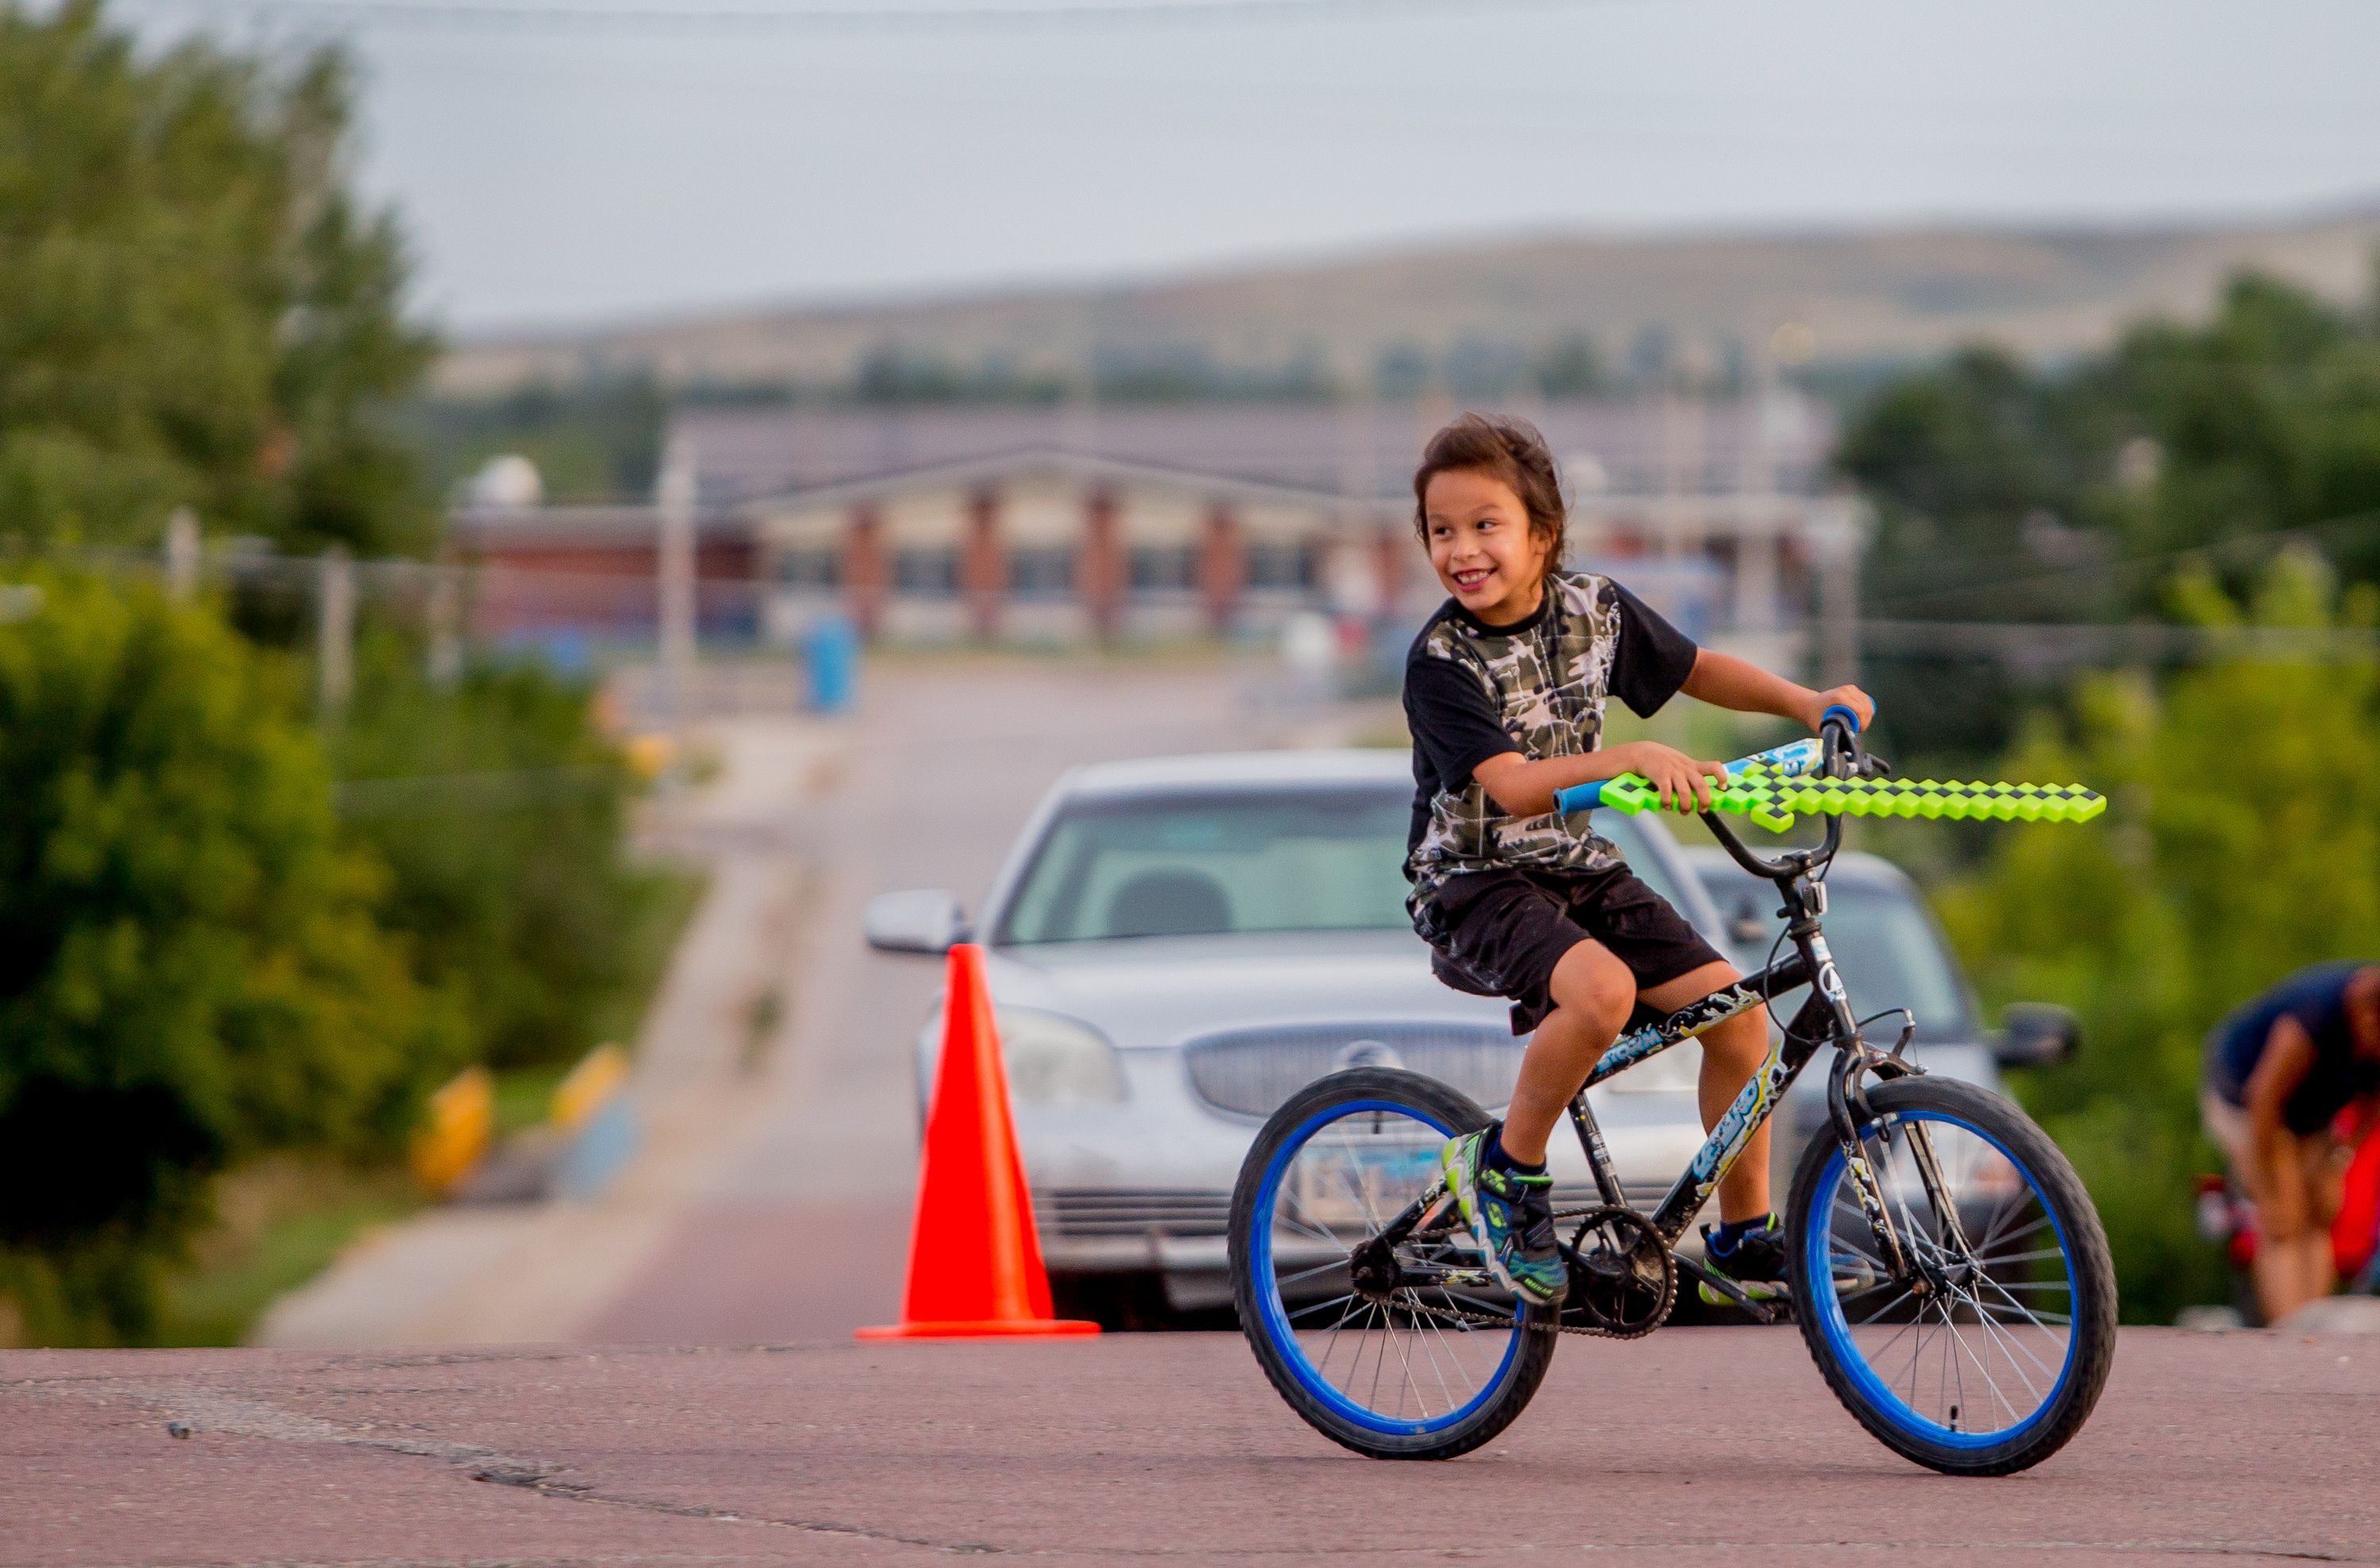 Caleb Prue, 7, of Okreek, rides his bike while playing with friends on September 1, 2018, during the first annual Sicangu Youth Program "Back-to-School" block party in downtown Mission, South Dakota. Image by Brian Munoz. South Dakota, 2018.